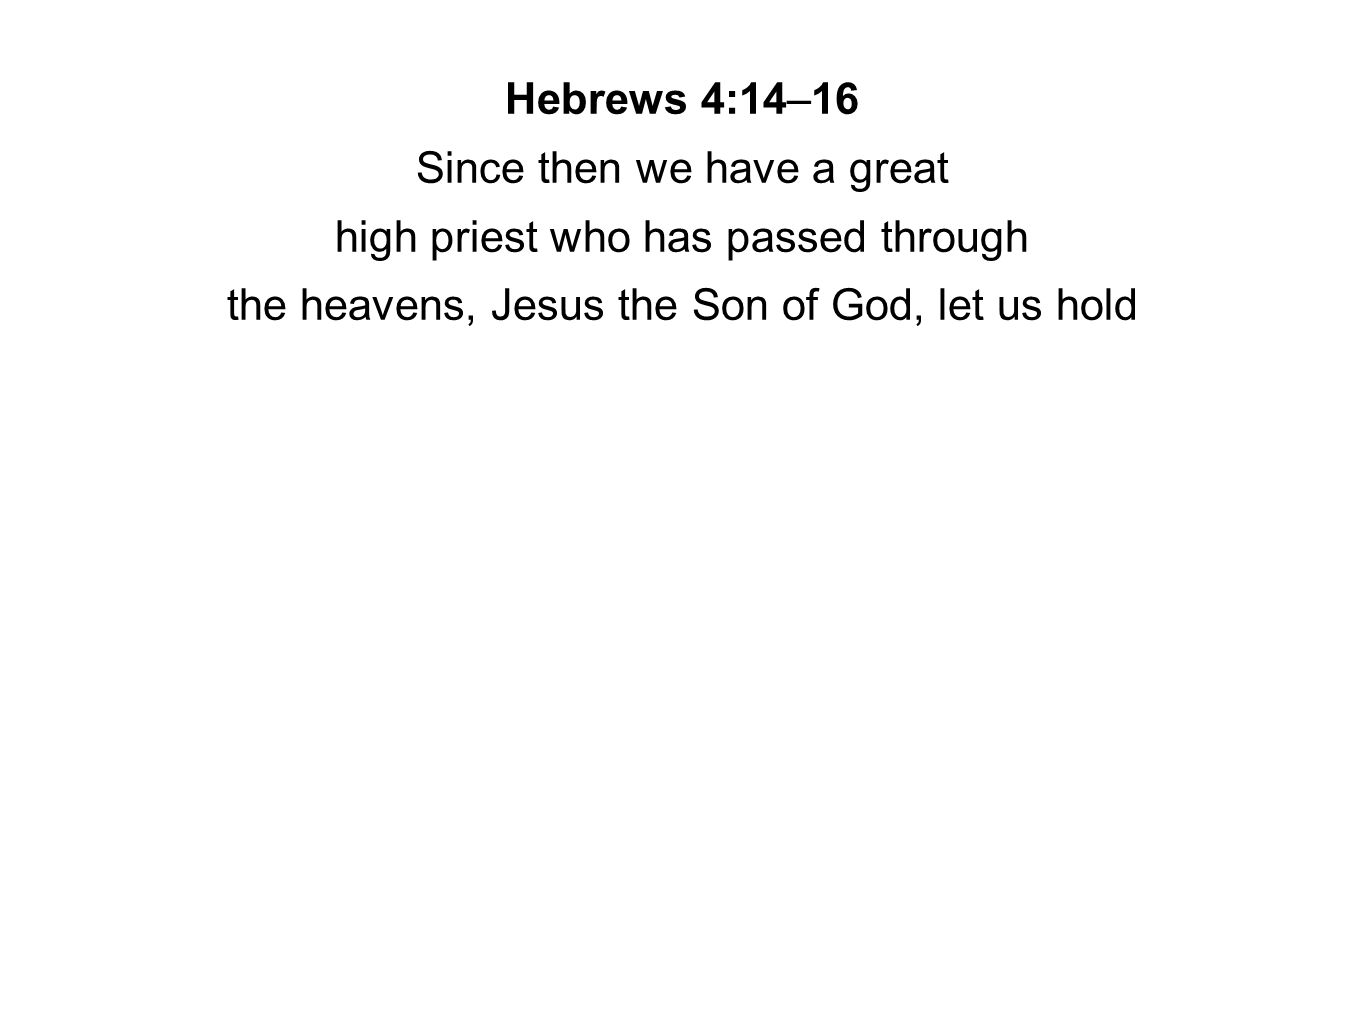 Hebrews 4:14–16 Since then we have a great high priest who has passed through the heavens, Jesus the Son of God, let us hold